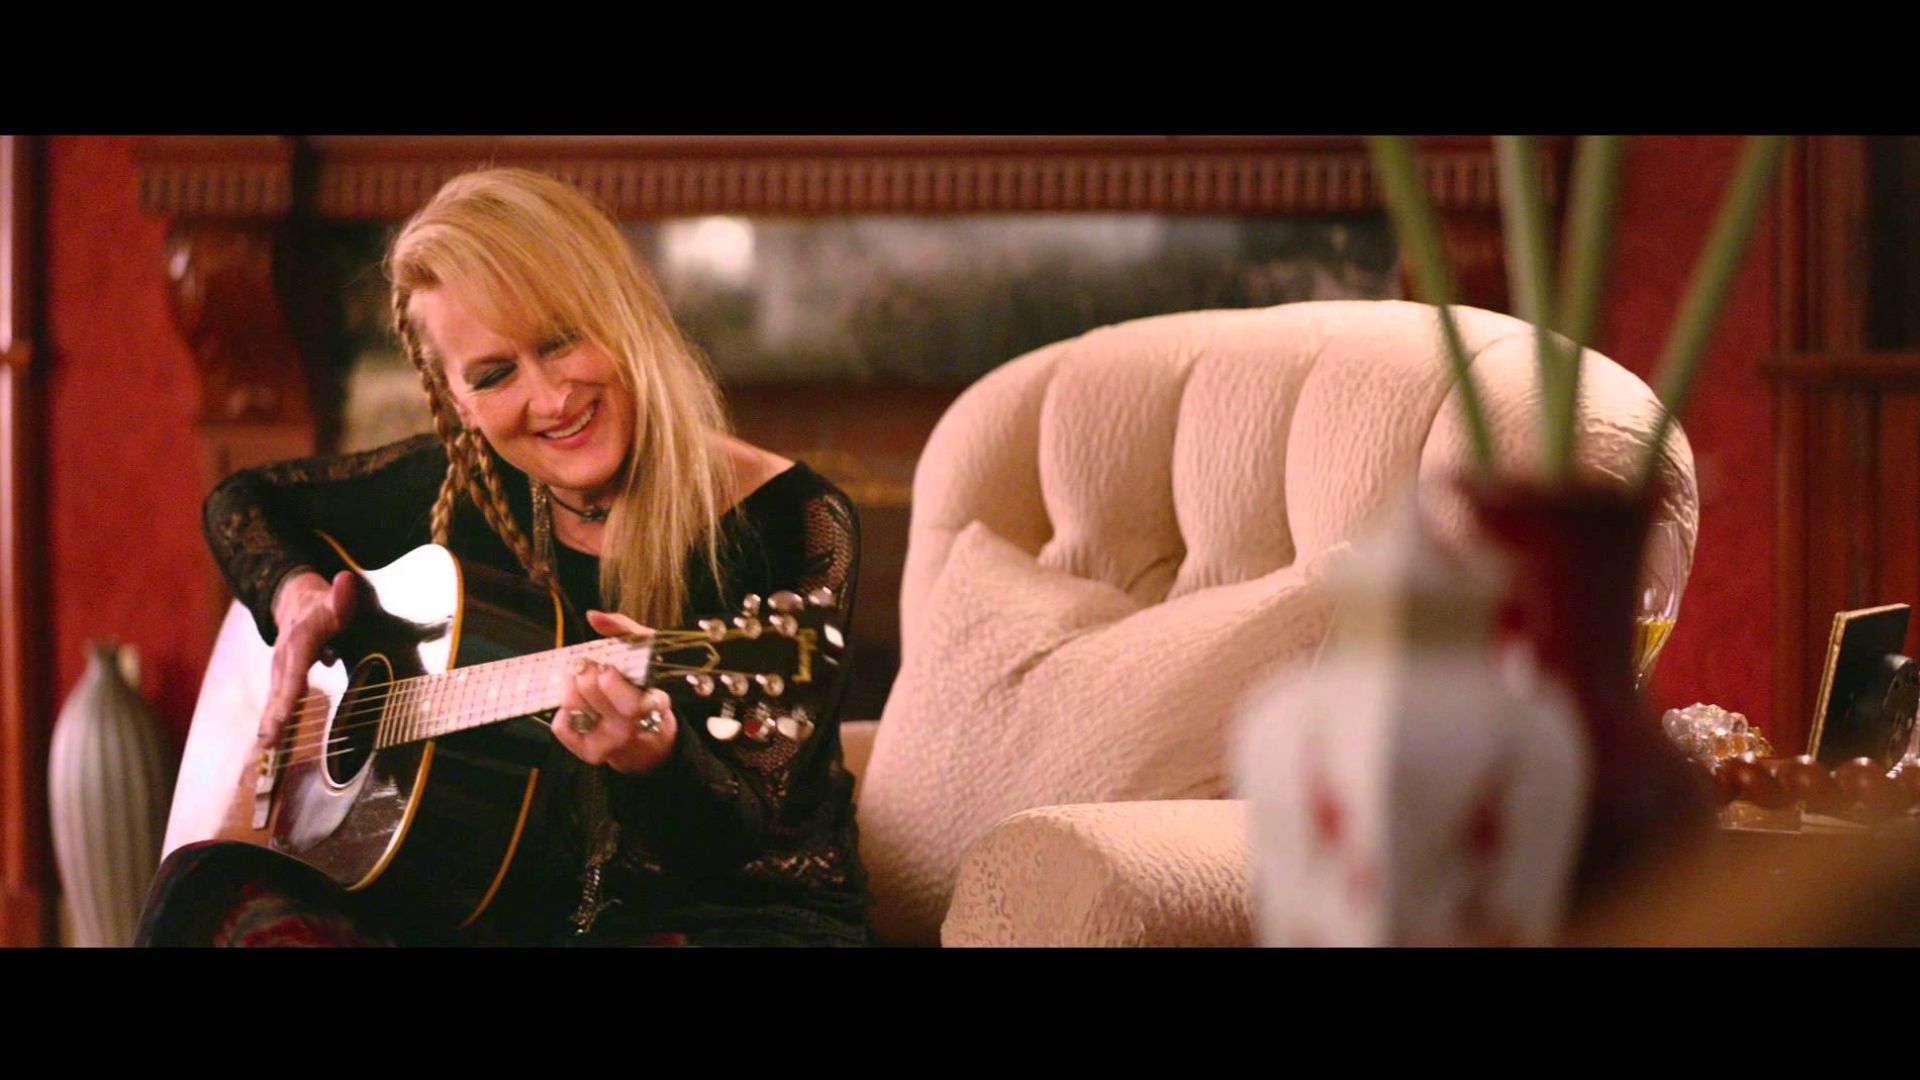 Meryl Streep Rocks Out in New &#039;Ricki and the Flash&#039; Trailer